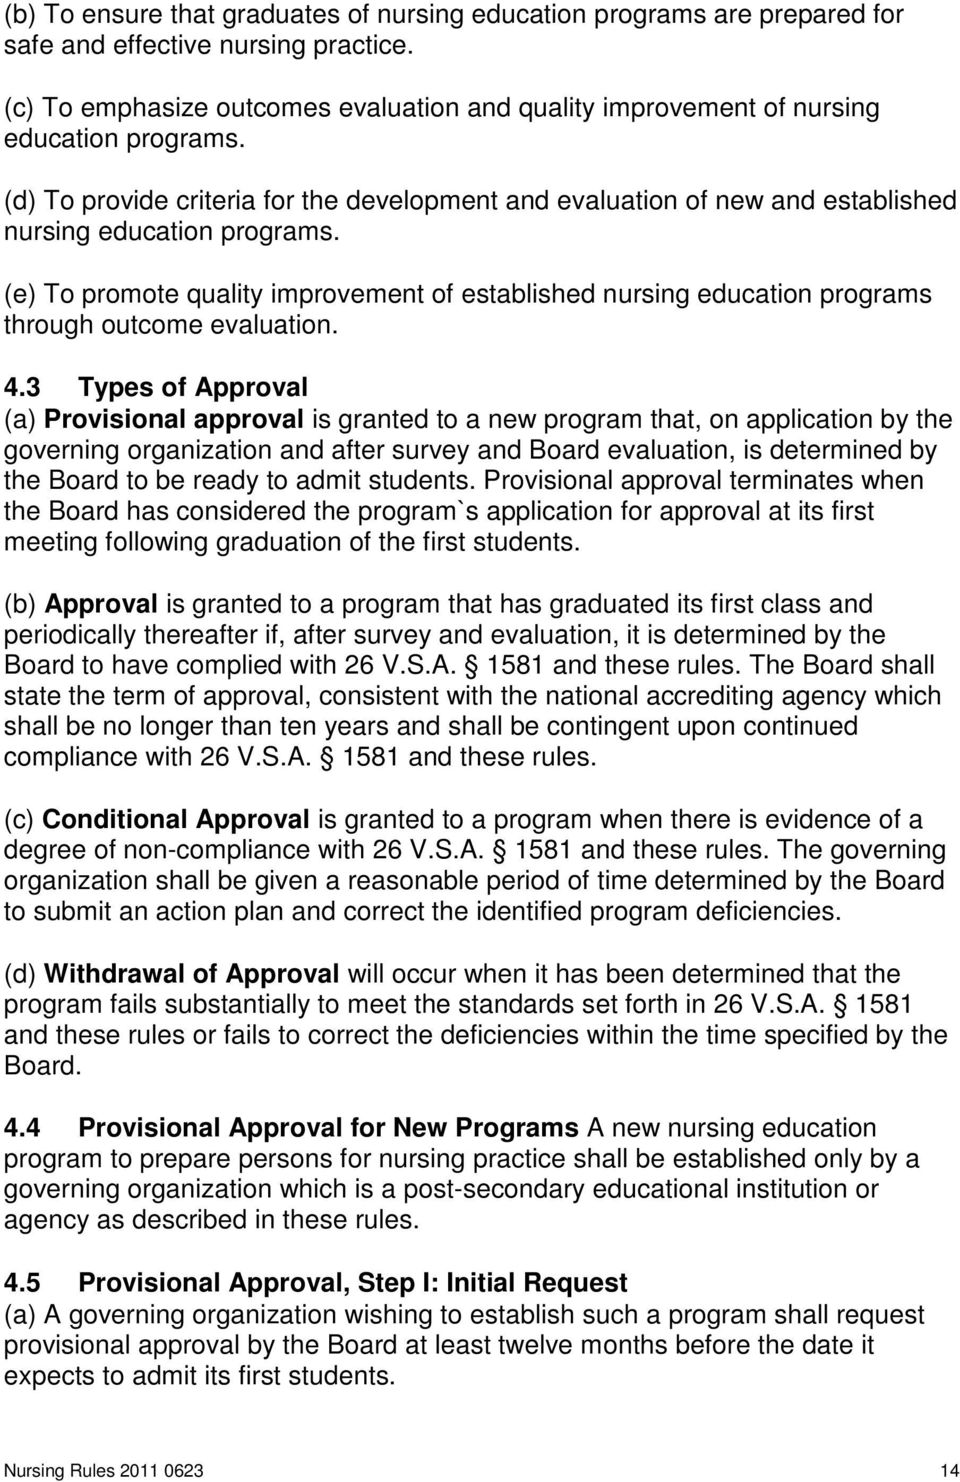 (d) To provide criteria for the development and evaluation of new and established nursing education programs.